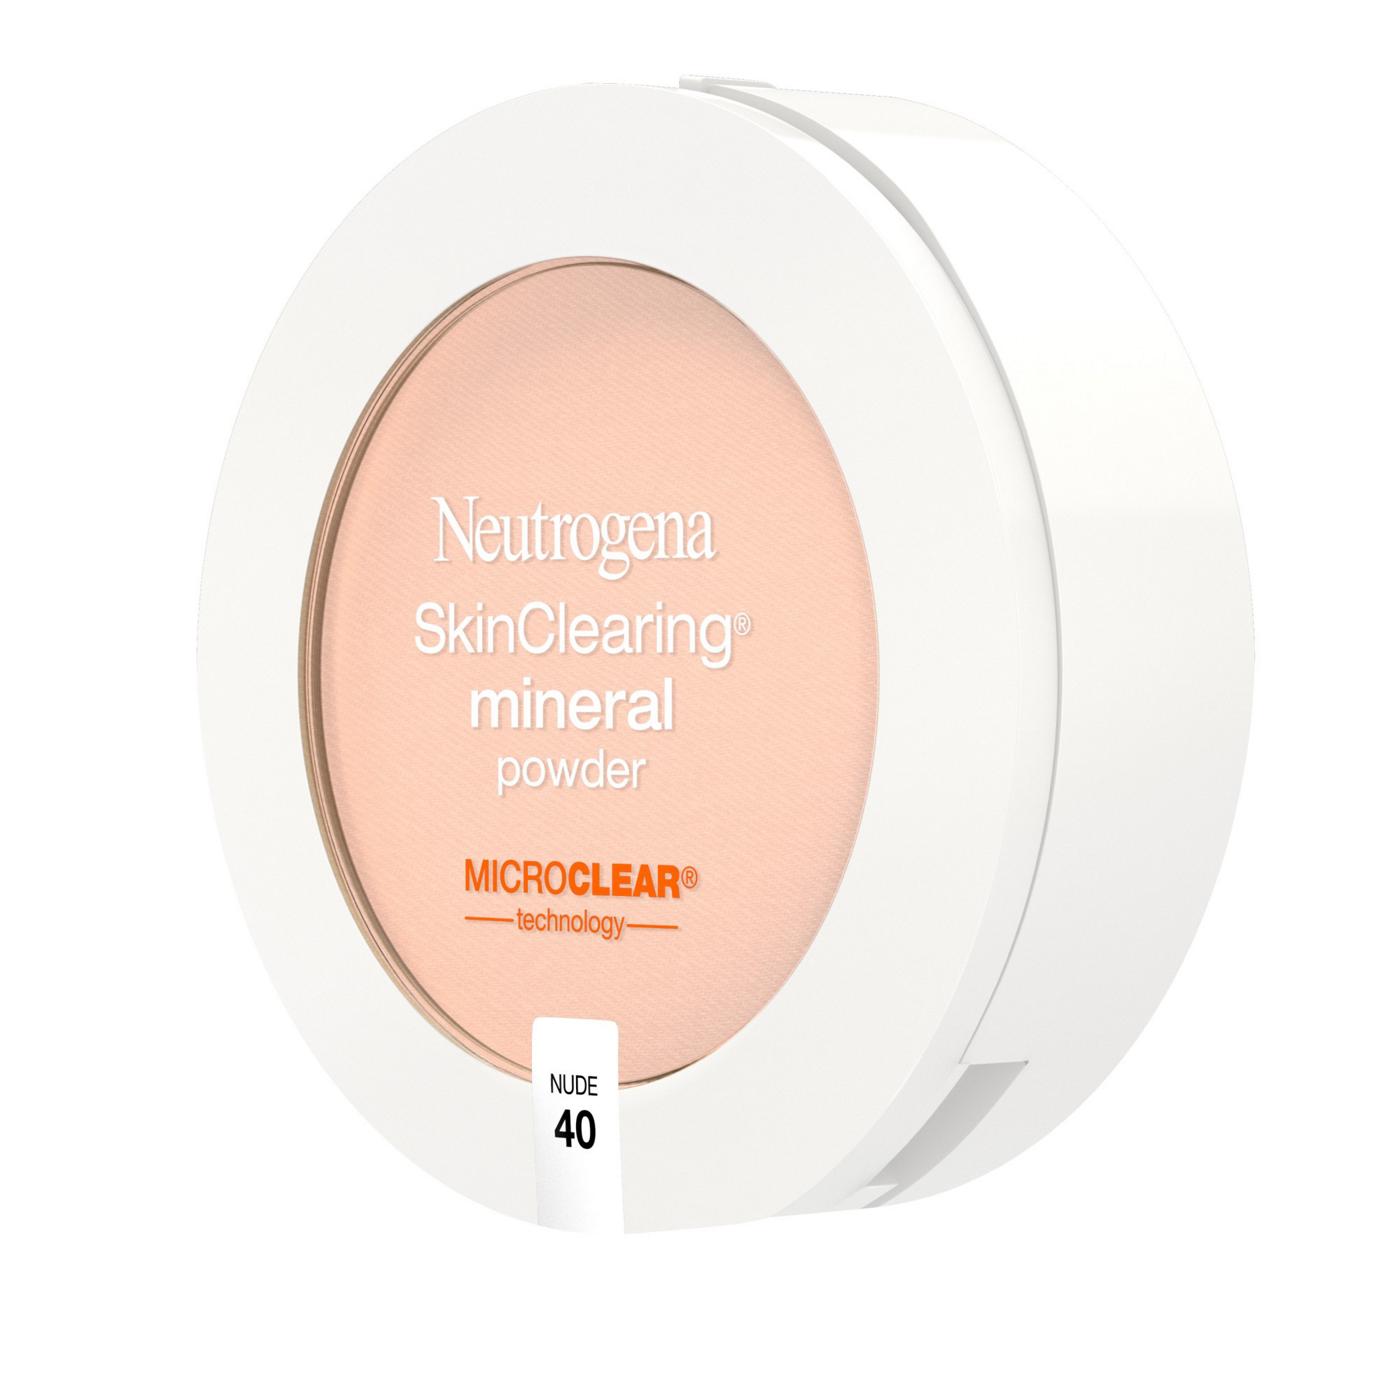 Neutrogena Skinclearing Mineral Powder 40 Nude; image 5 of 5